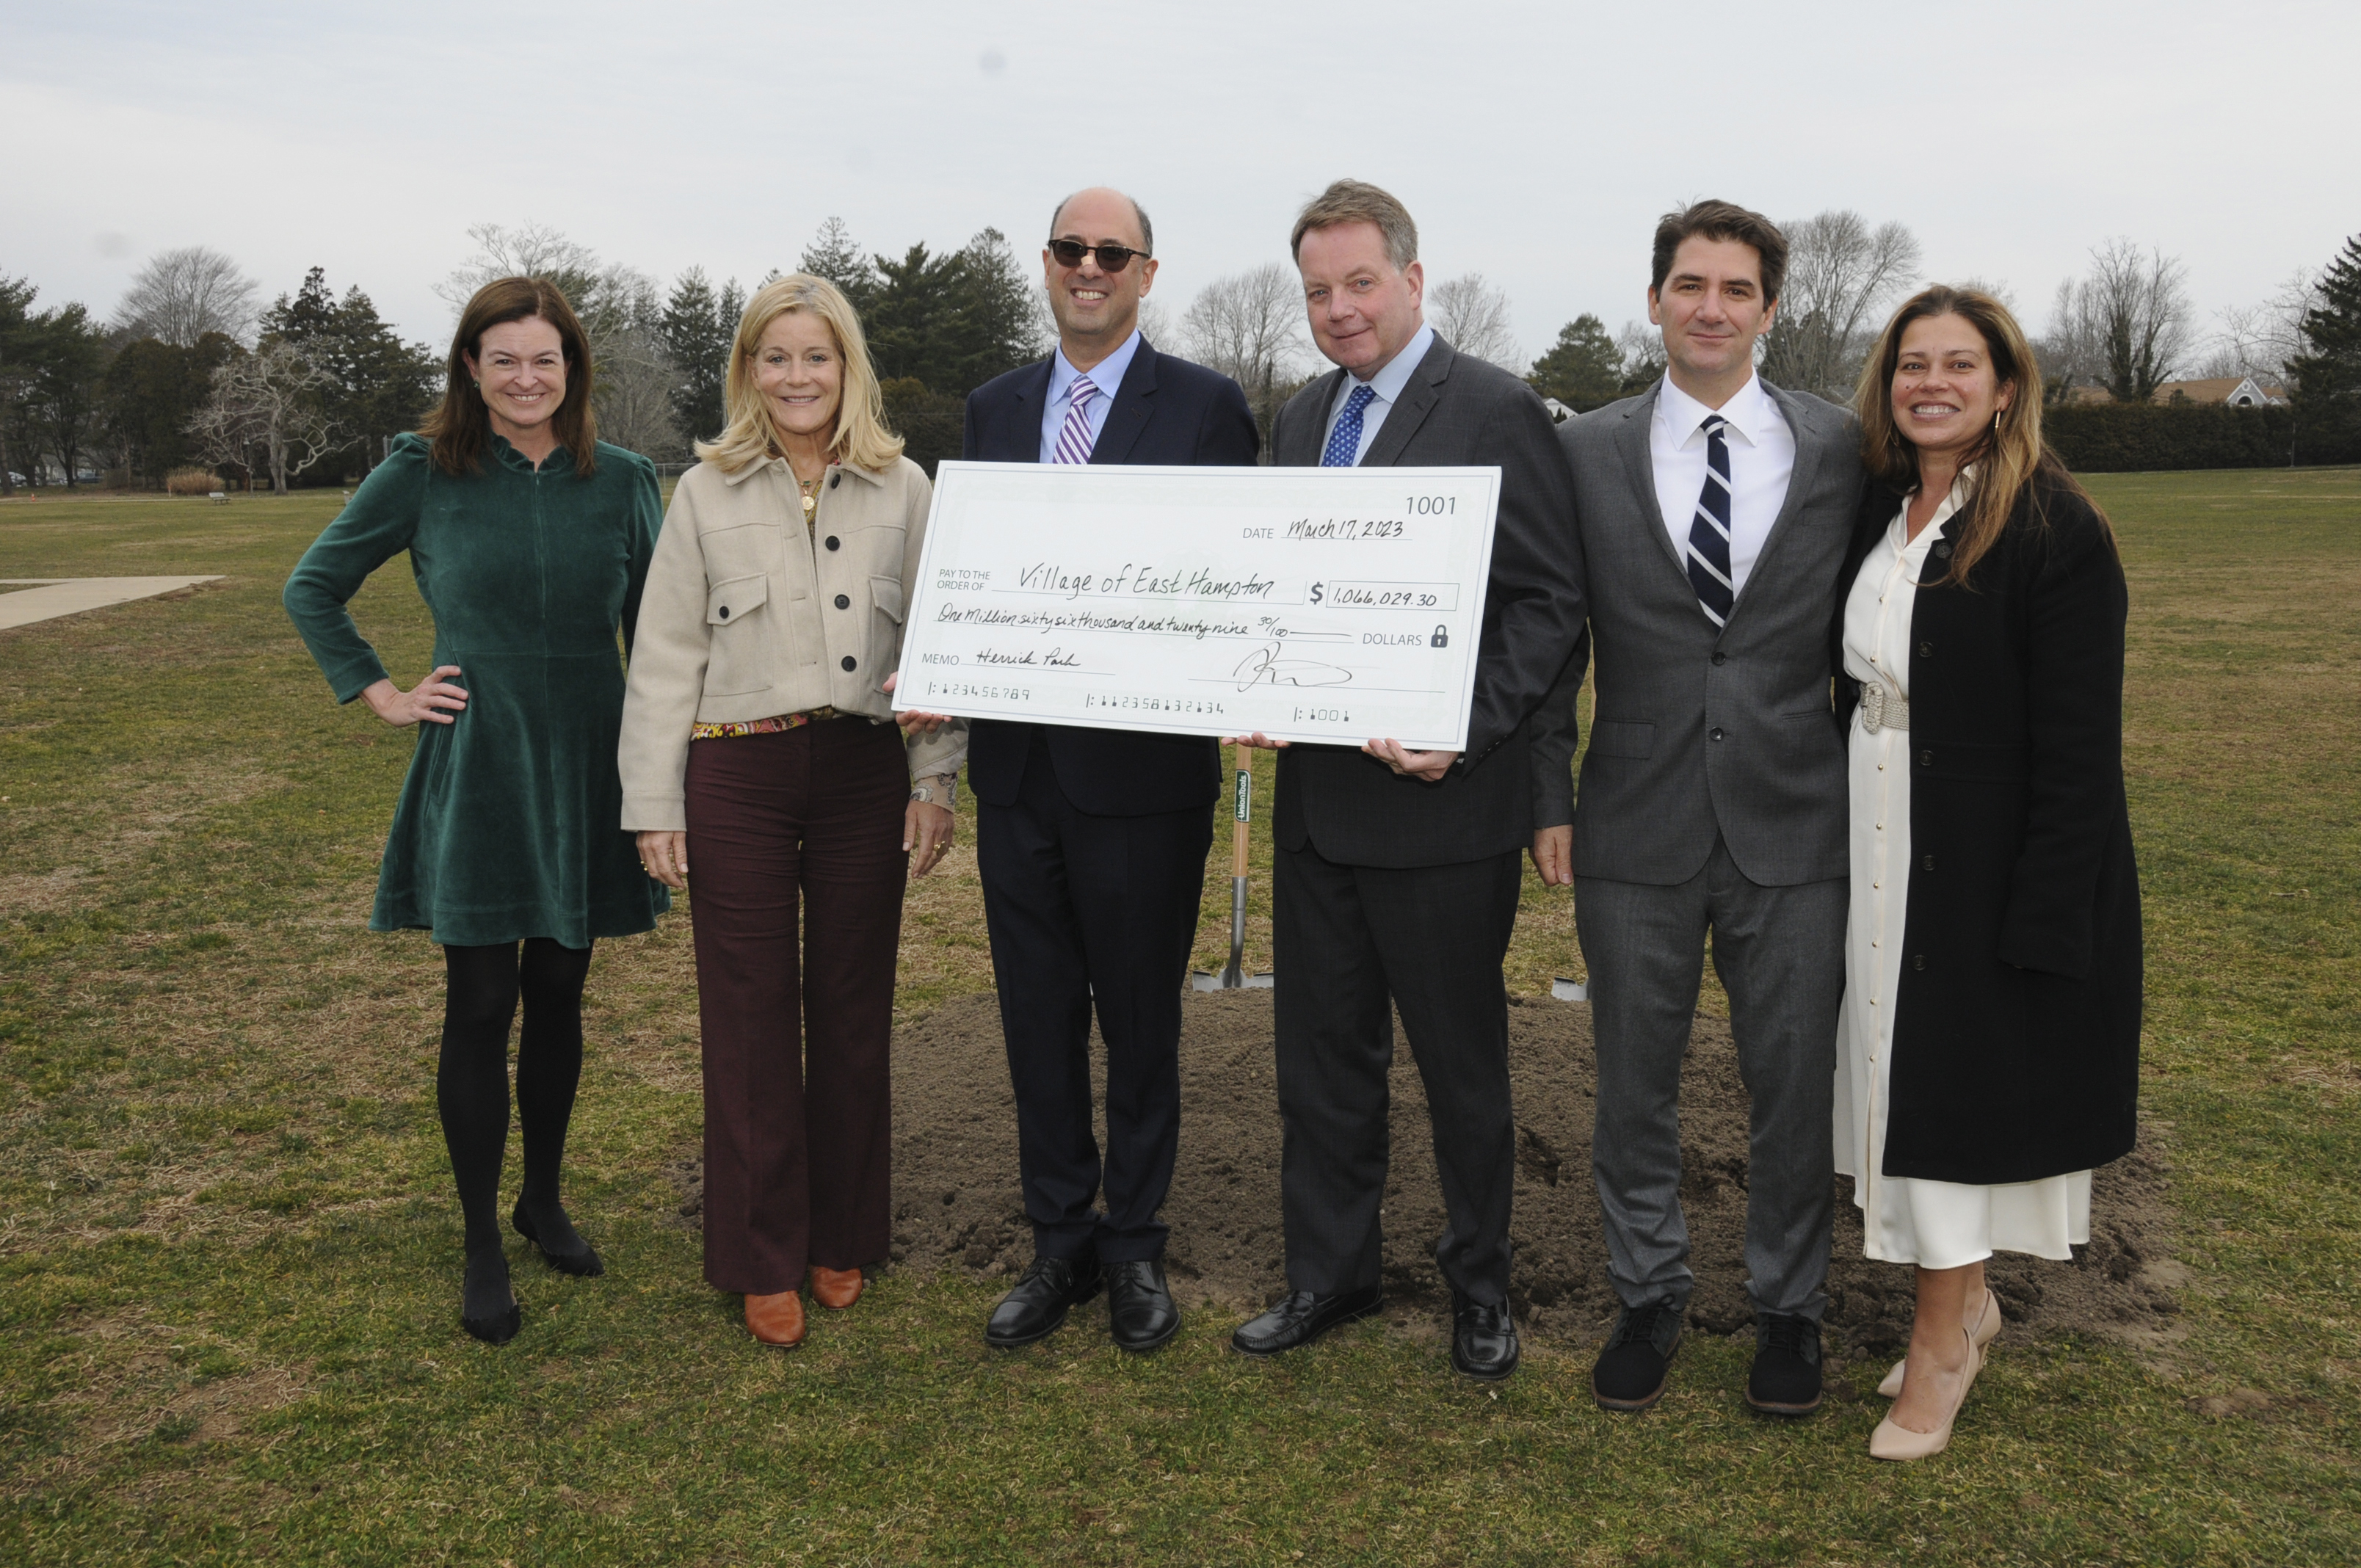 On Friday afternoon, East Hampton Village Mayor Jerry Larsen, East Hampton Village Trustees and East Hampton Village Foundation CEO and Chairman of the Board Bradford Billet broke ground for the Herrick Park Beautification Program. Brad Billet presented the Village with a Foundation check in the amount of $1,066,029.30 to support the initiative by the Trustees.   Carrie Doyle, Sarah Amaden, Bradford Billet, Mayor Jerry Larsen,  Chris Minard and Sandra Melendez, Esq.  RICHARD LEWIN